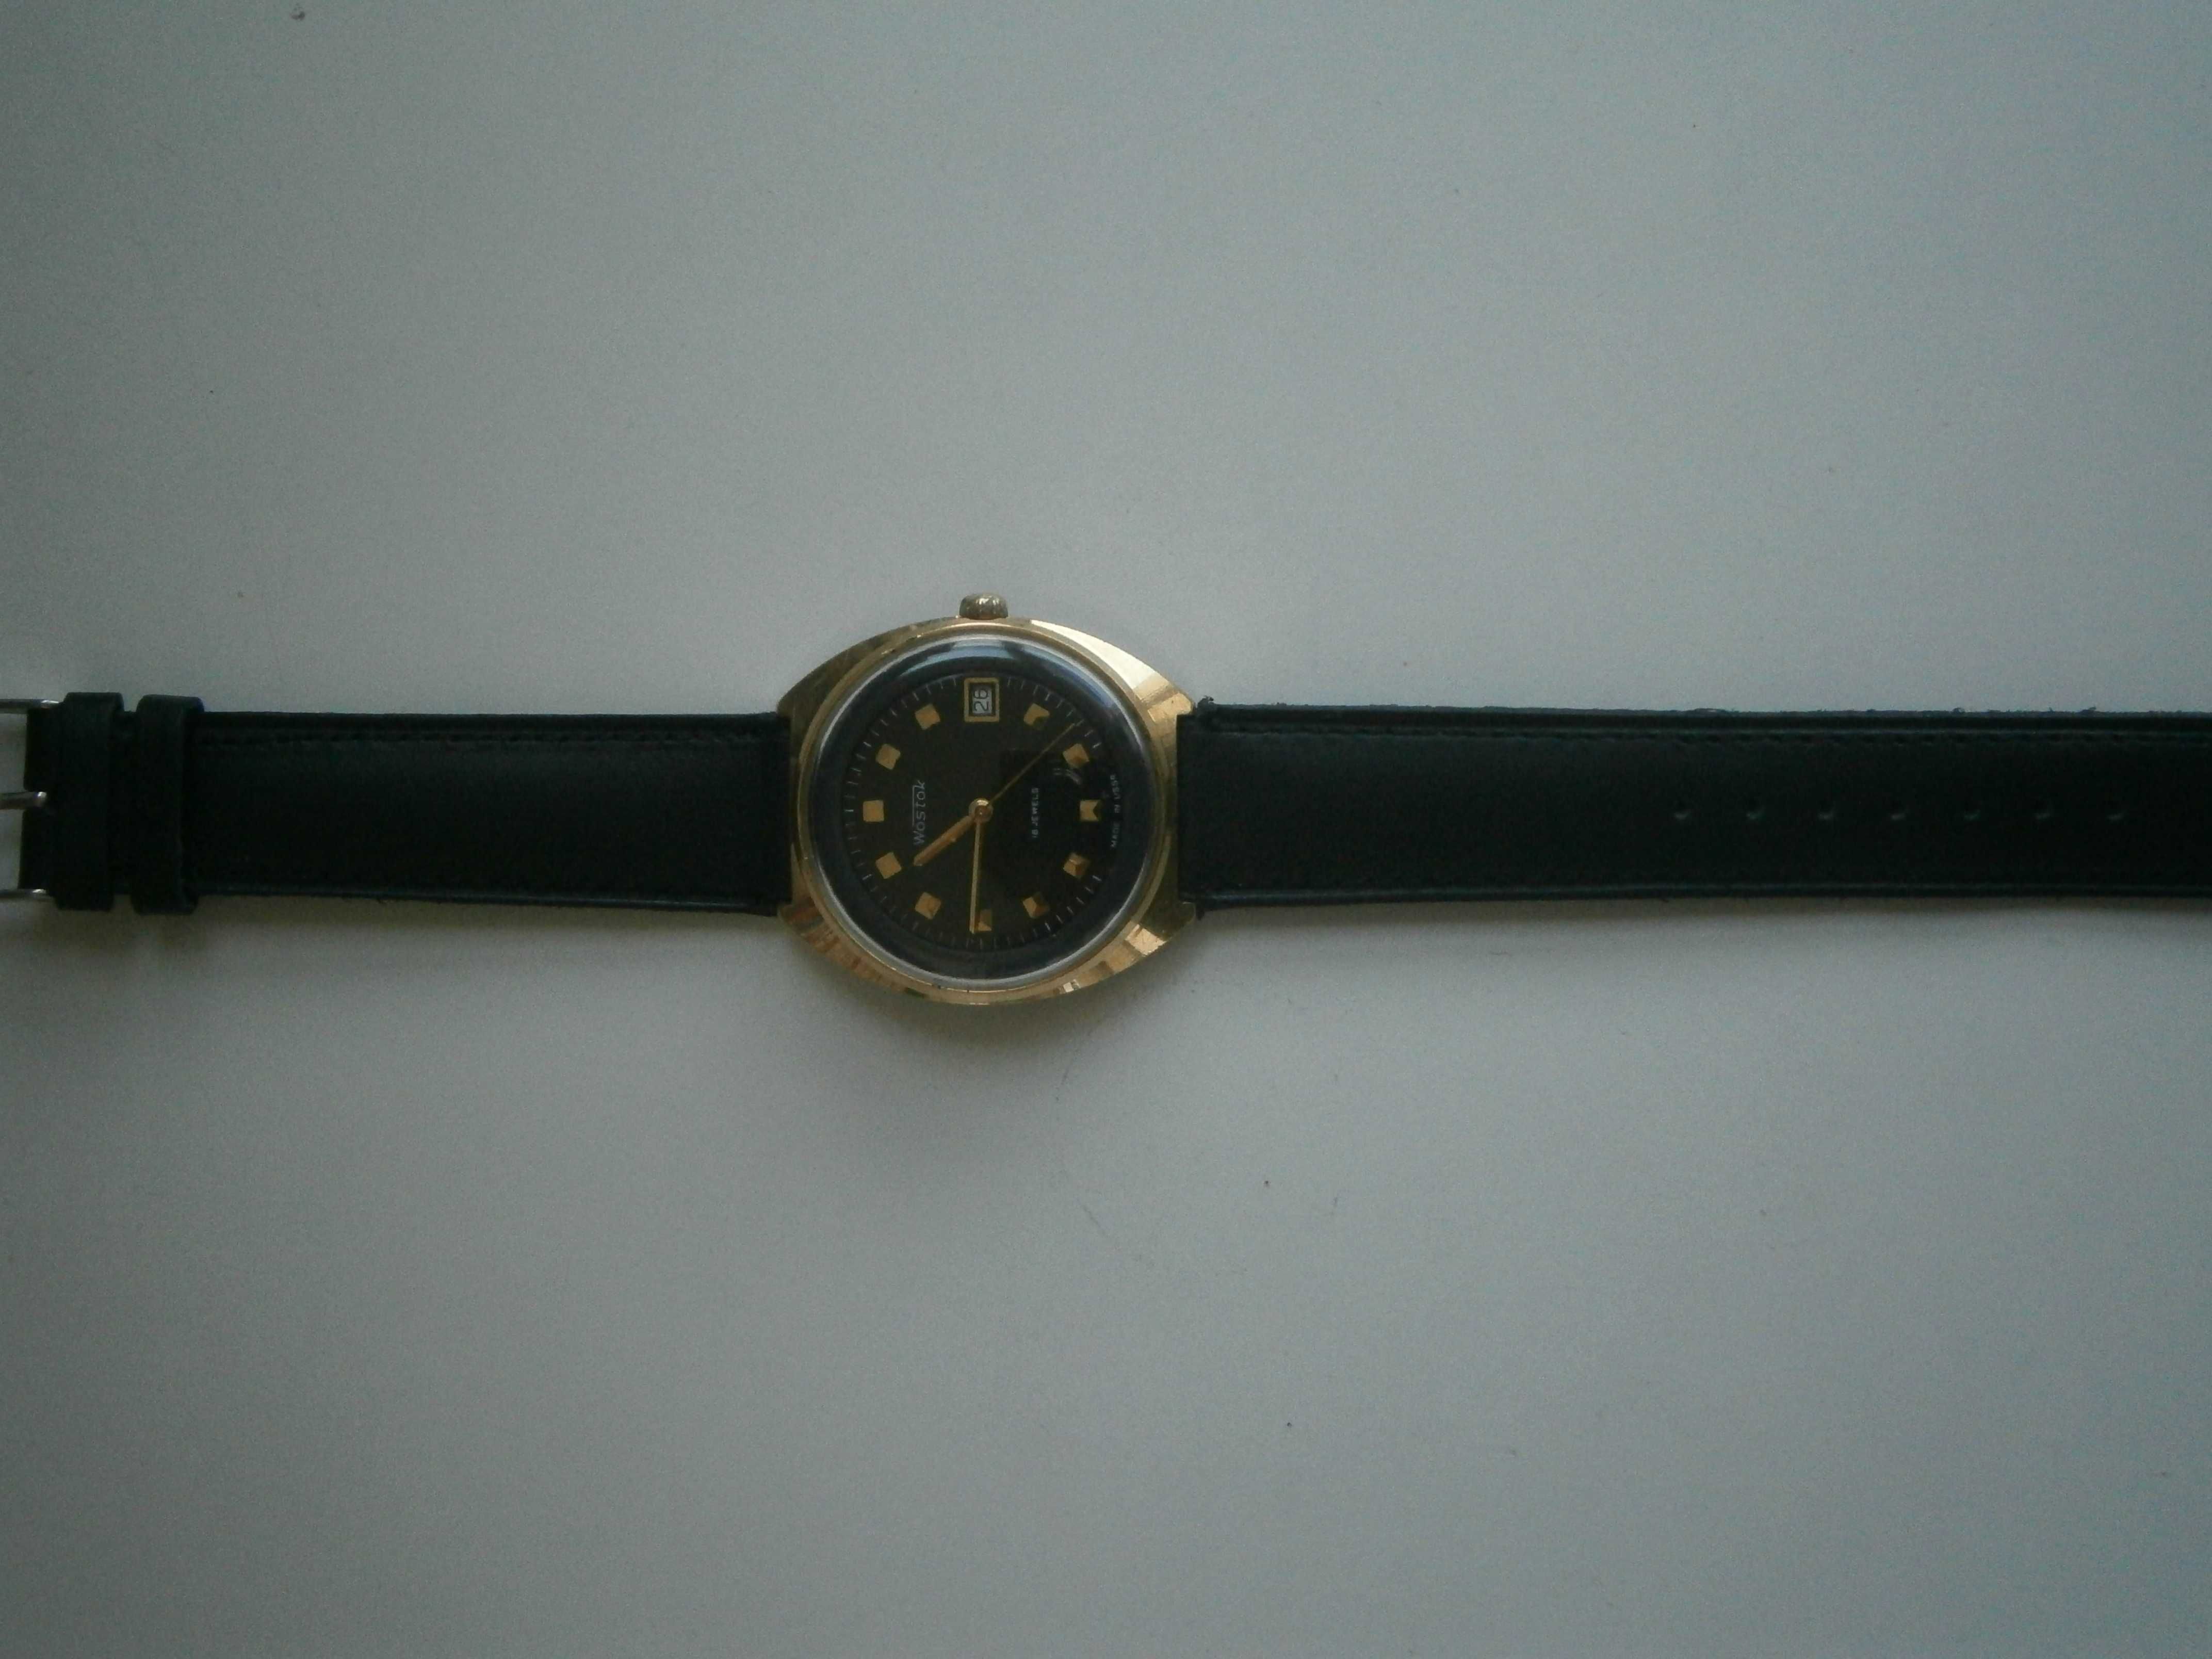 WOSTOK, 18 jewels, made in USSR, cal. 2214, case 38mm, черен ЦБ, TOP!